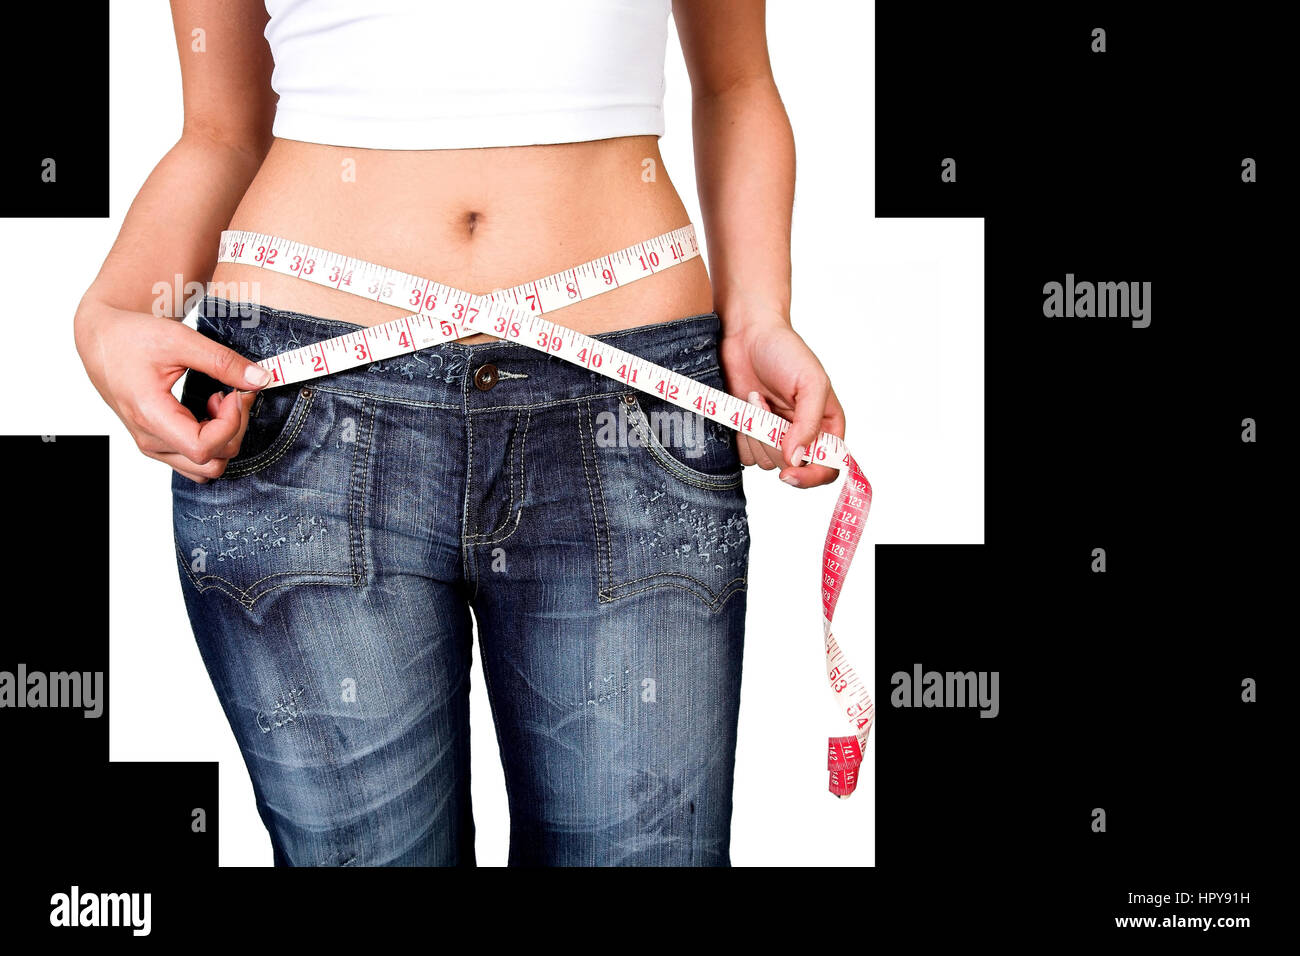 Skinny Weight Loss Woman Show Flat Stomach Pulling by Hand Oversized Big  Blue Pants Jeans. Slim Body Low Fat Healthy Size Athletic Stock Photo -  Image of large, body: 214863780